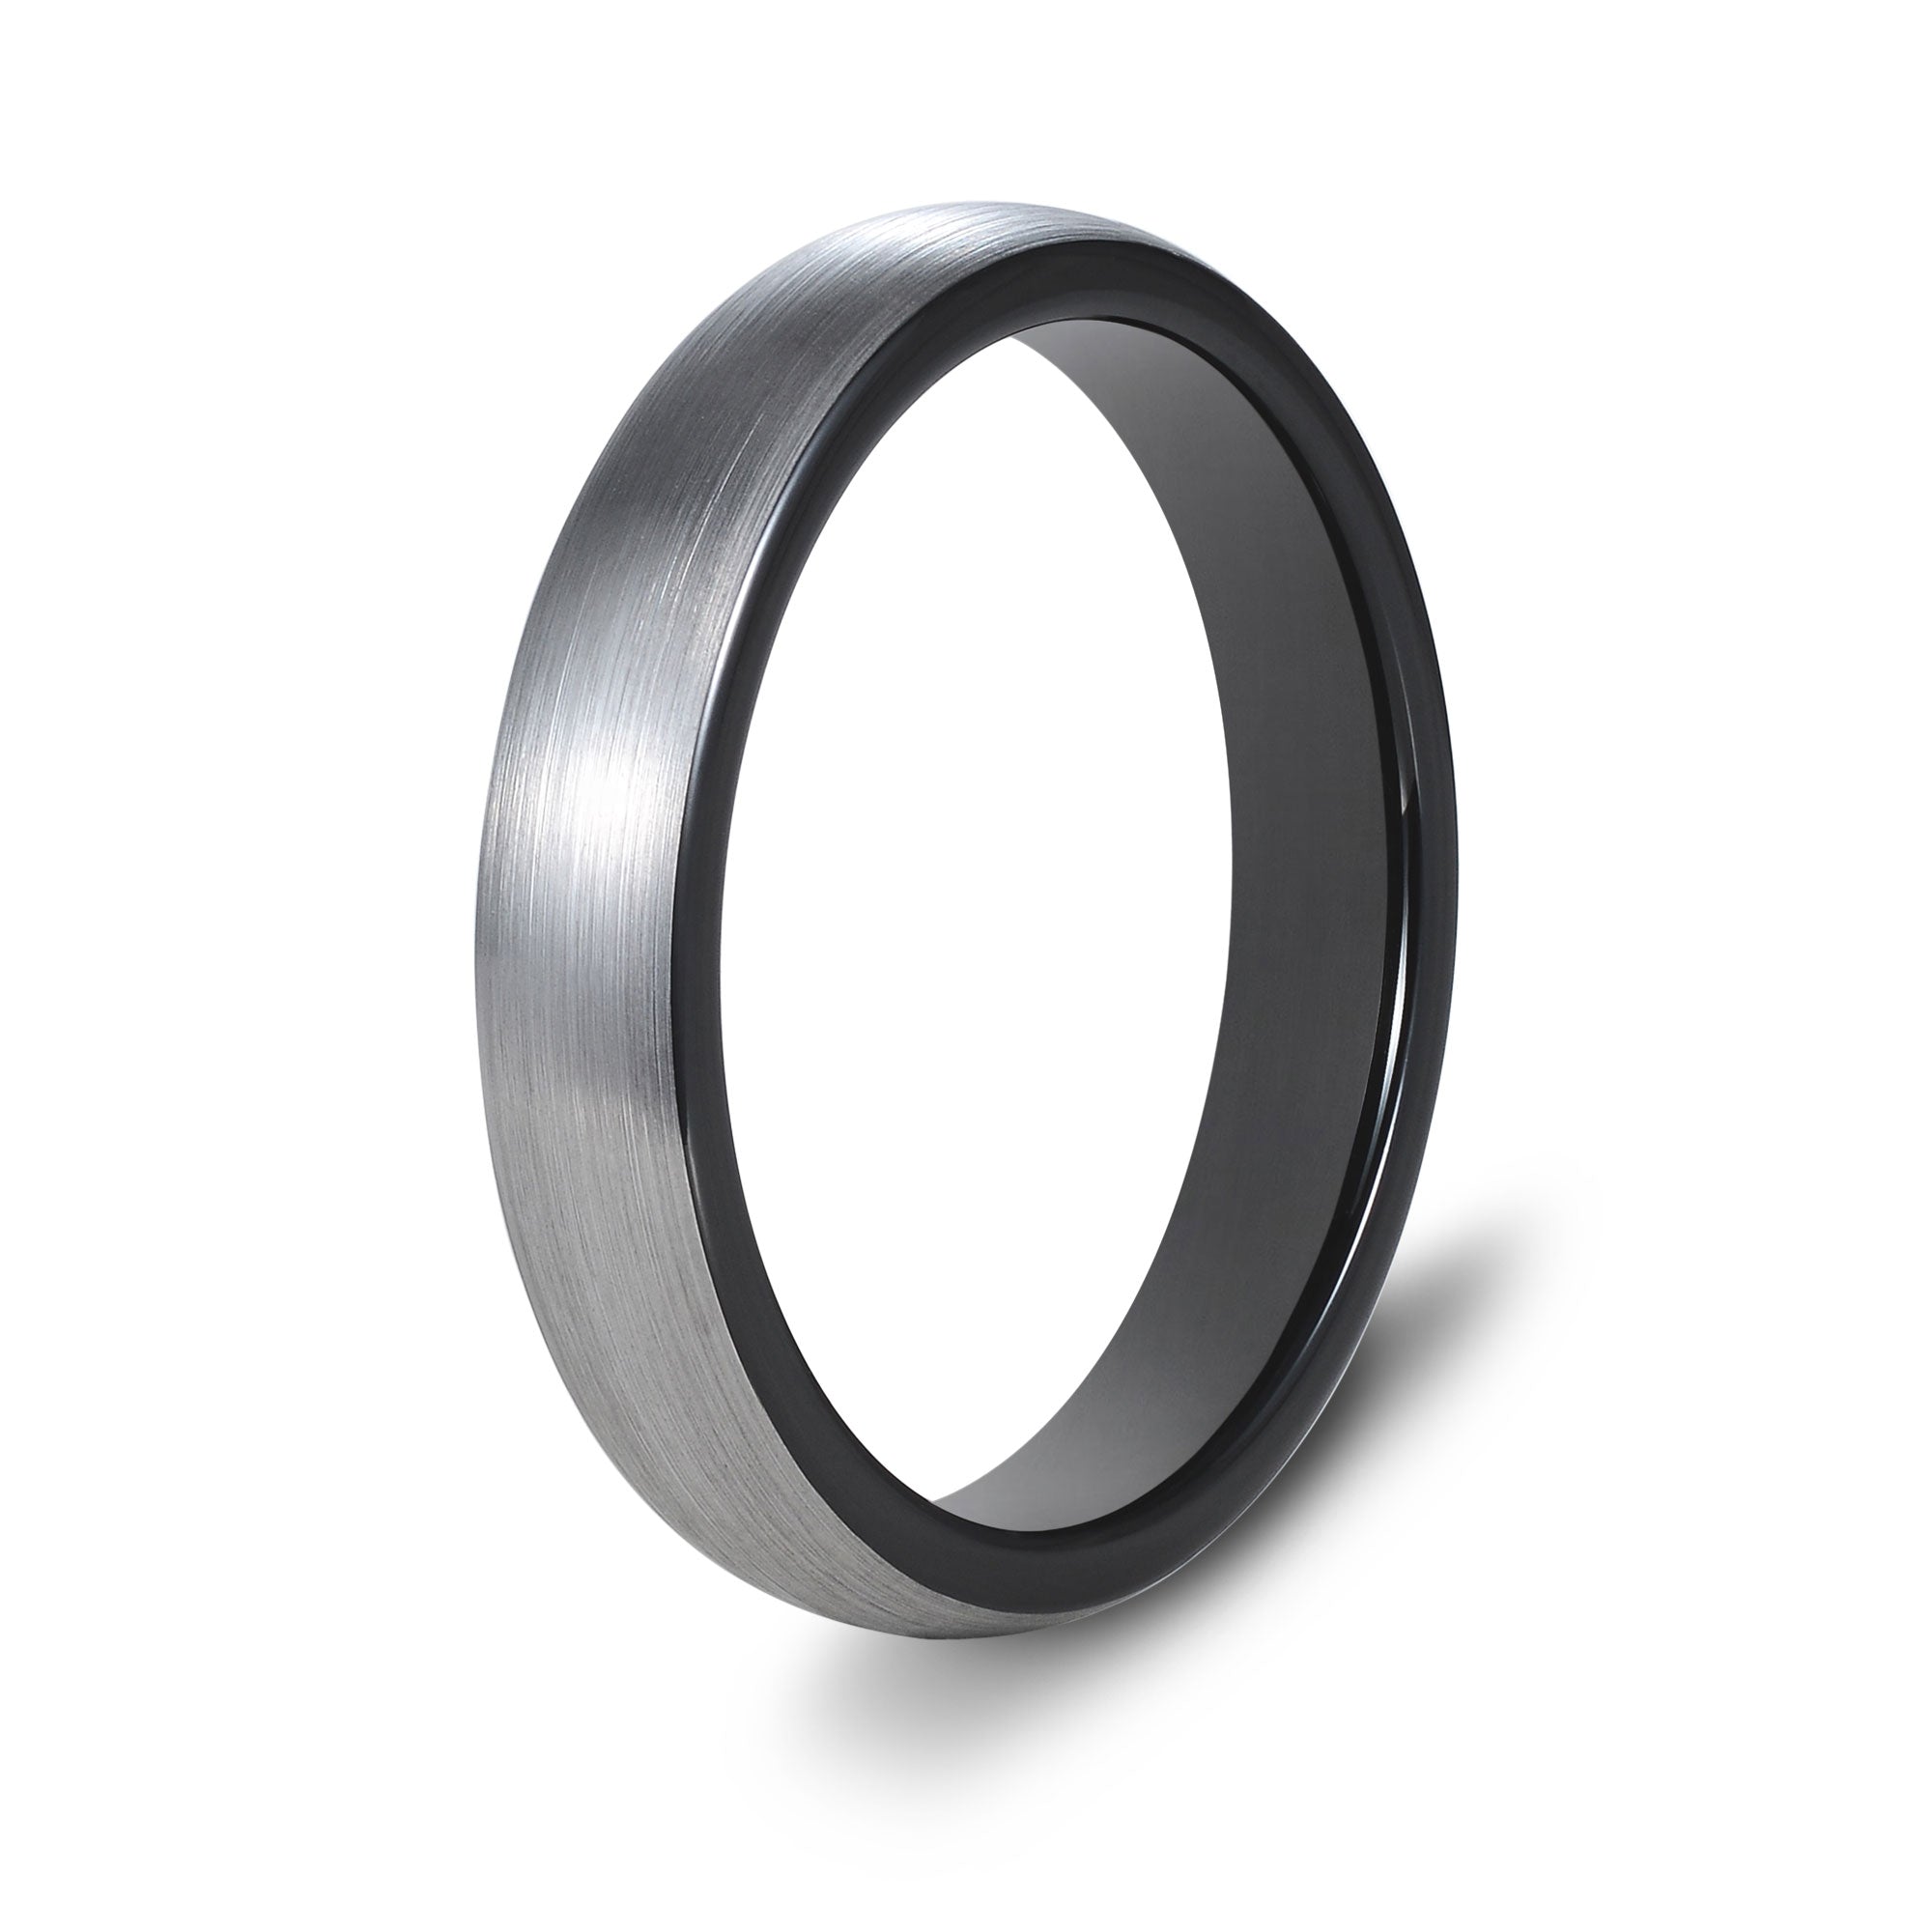 The Eloquent - Silver 4mm Brushed Tungsten Ring